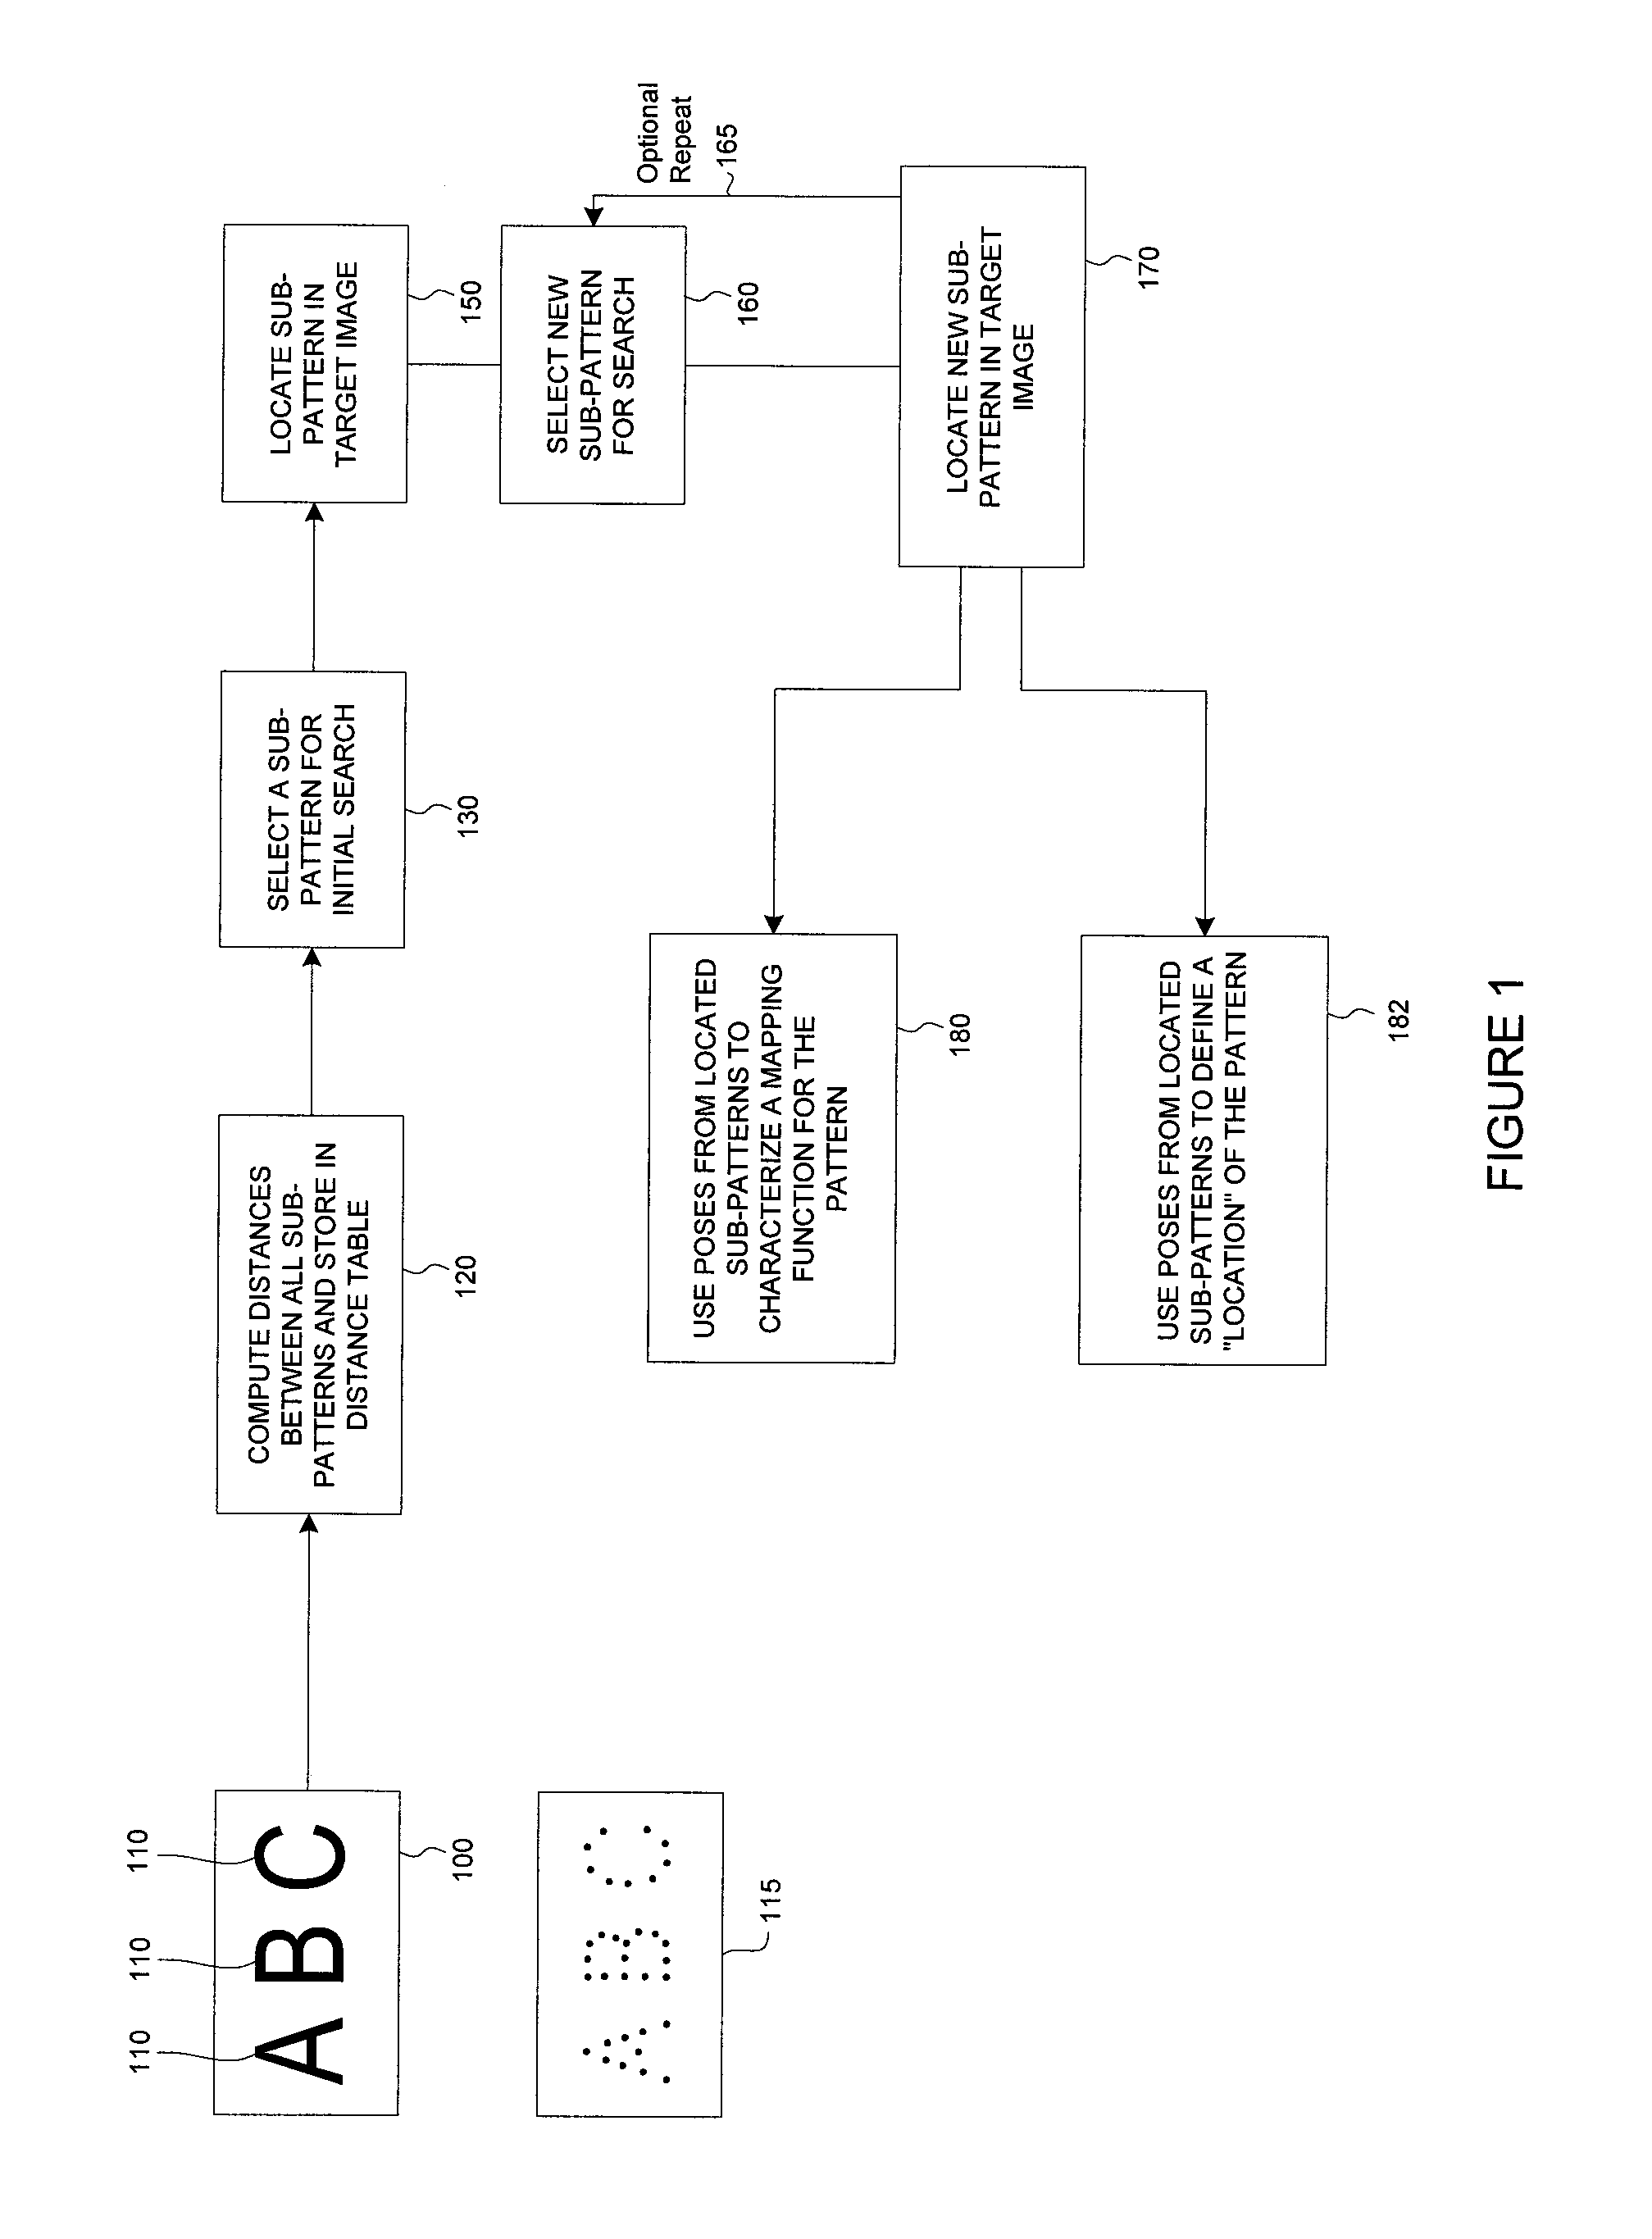 Methods for finding and characterizing a deformed pattern in an image